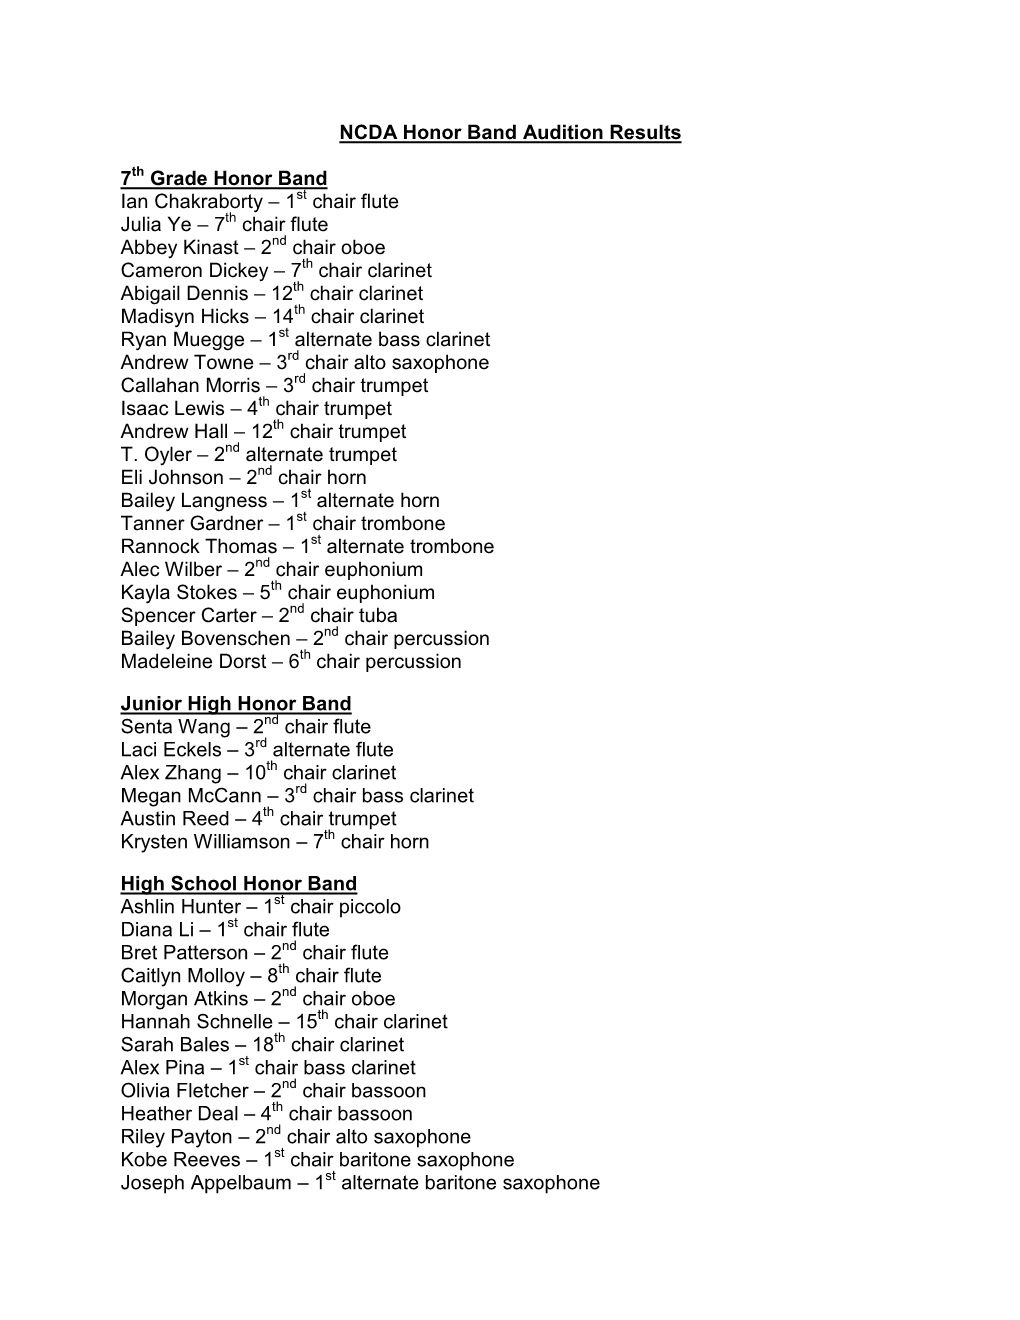 2012-13 NCDA Honor Band Audition Results